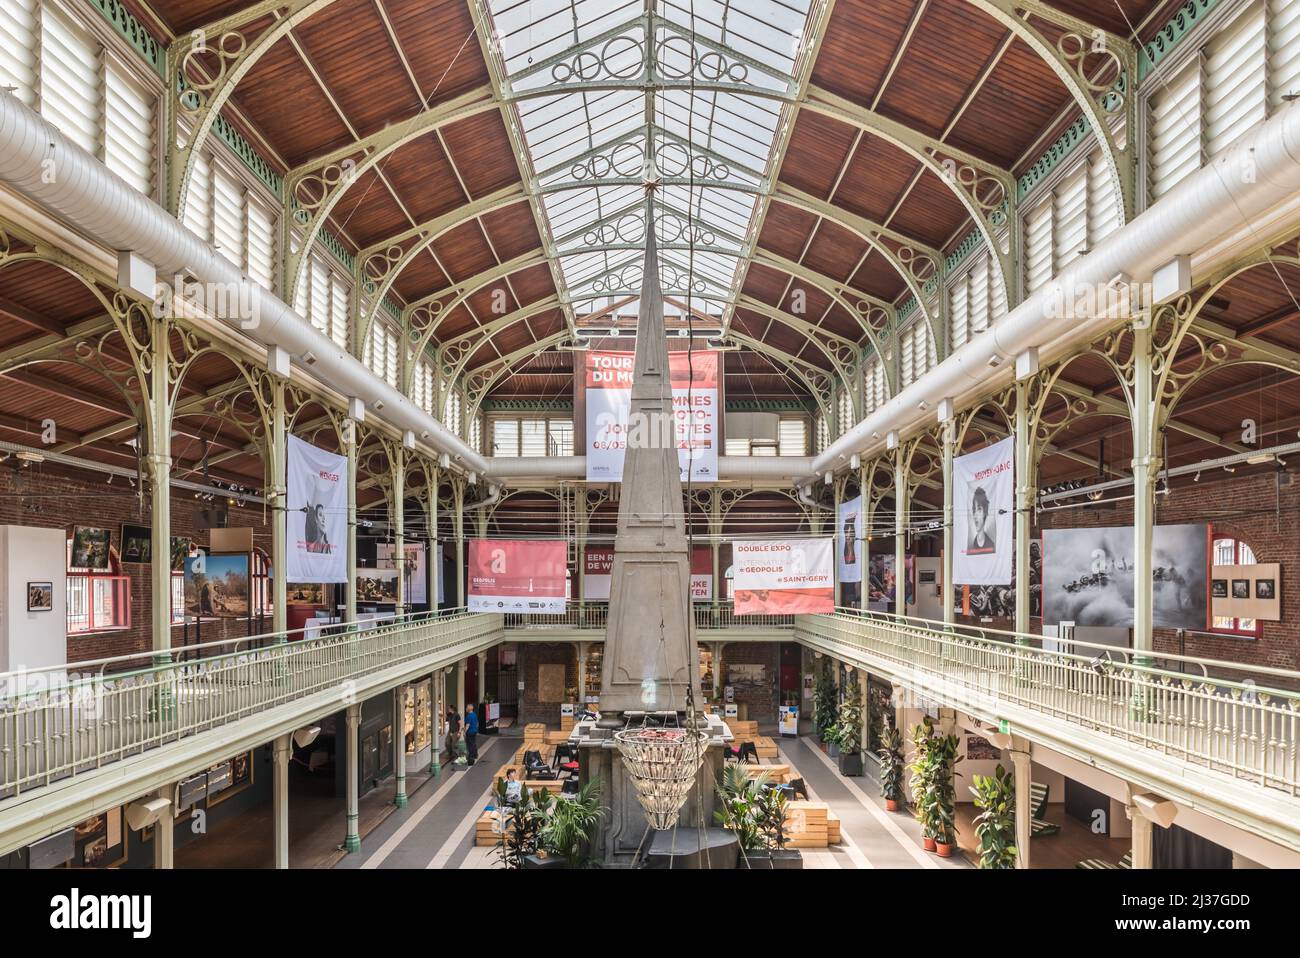 Brussels Old Town - Belgium Interior design of the Halles Saint-Gery - Sint Goriks Hallen a commercial mall with restaurants, expositions and cafés. Stock Photo